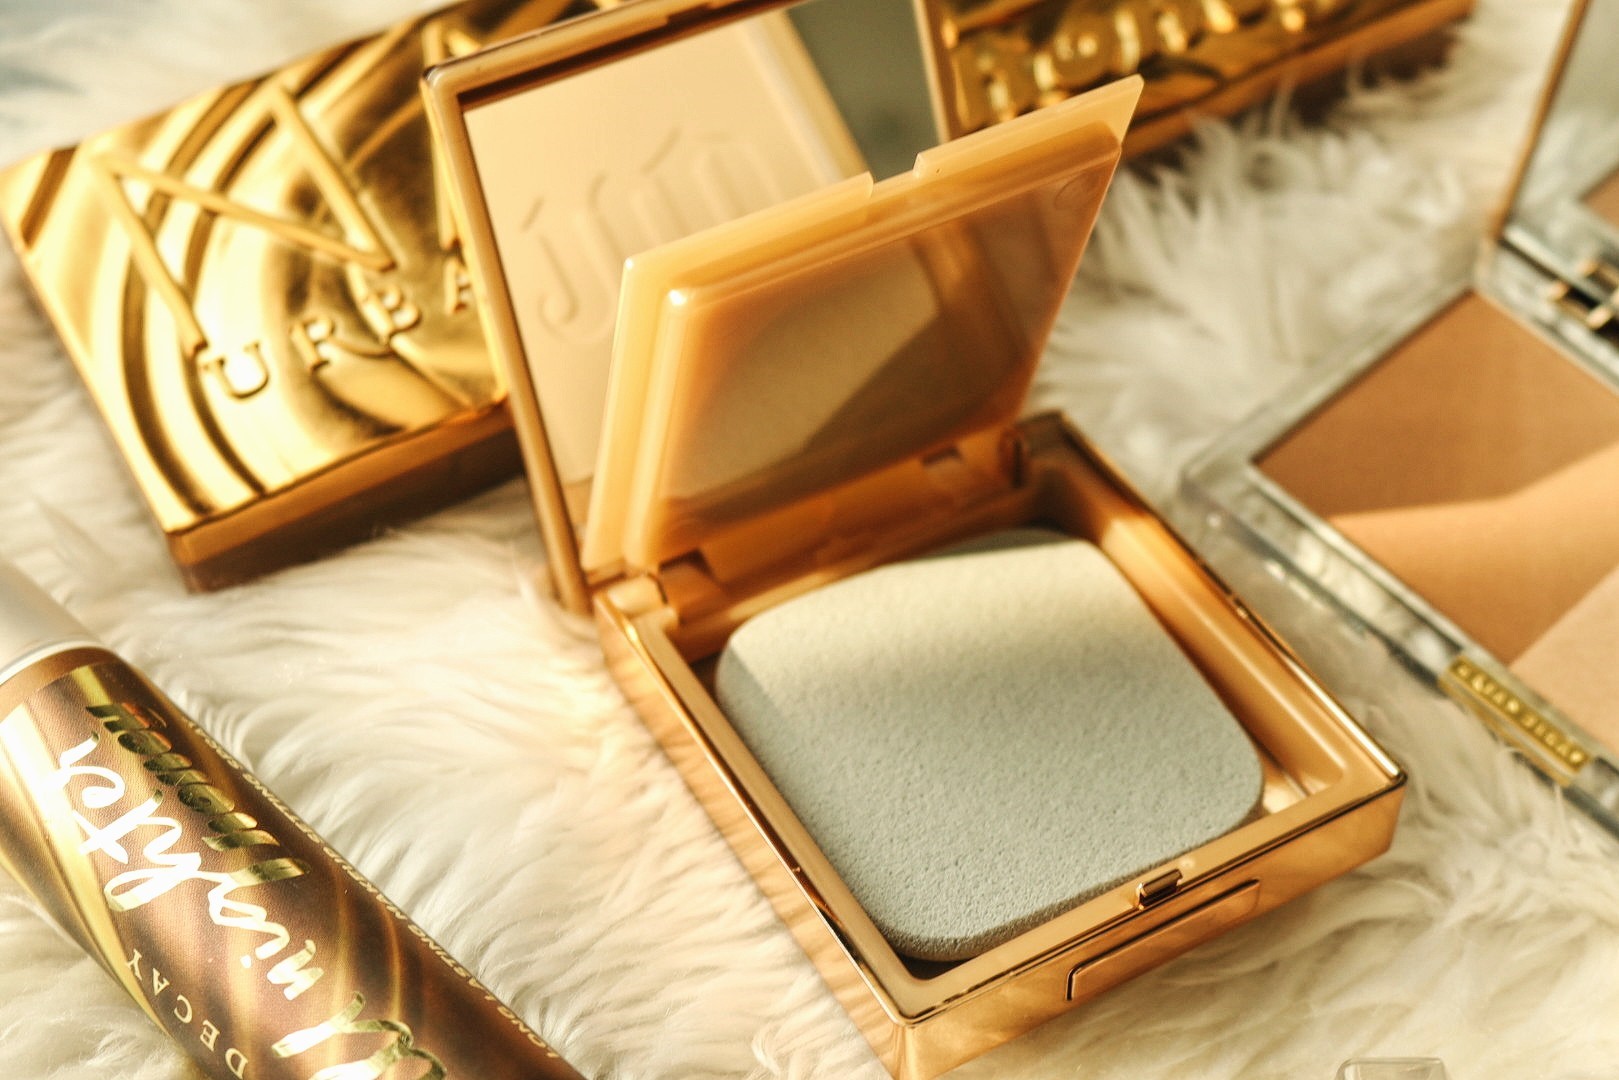 Urban decay Stay Naked The Fix Powder Foundation